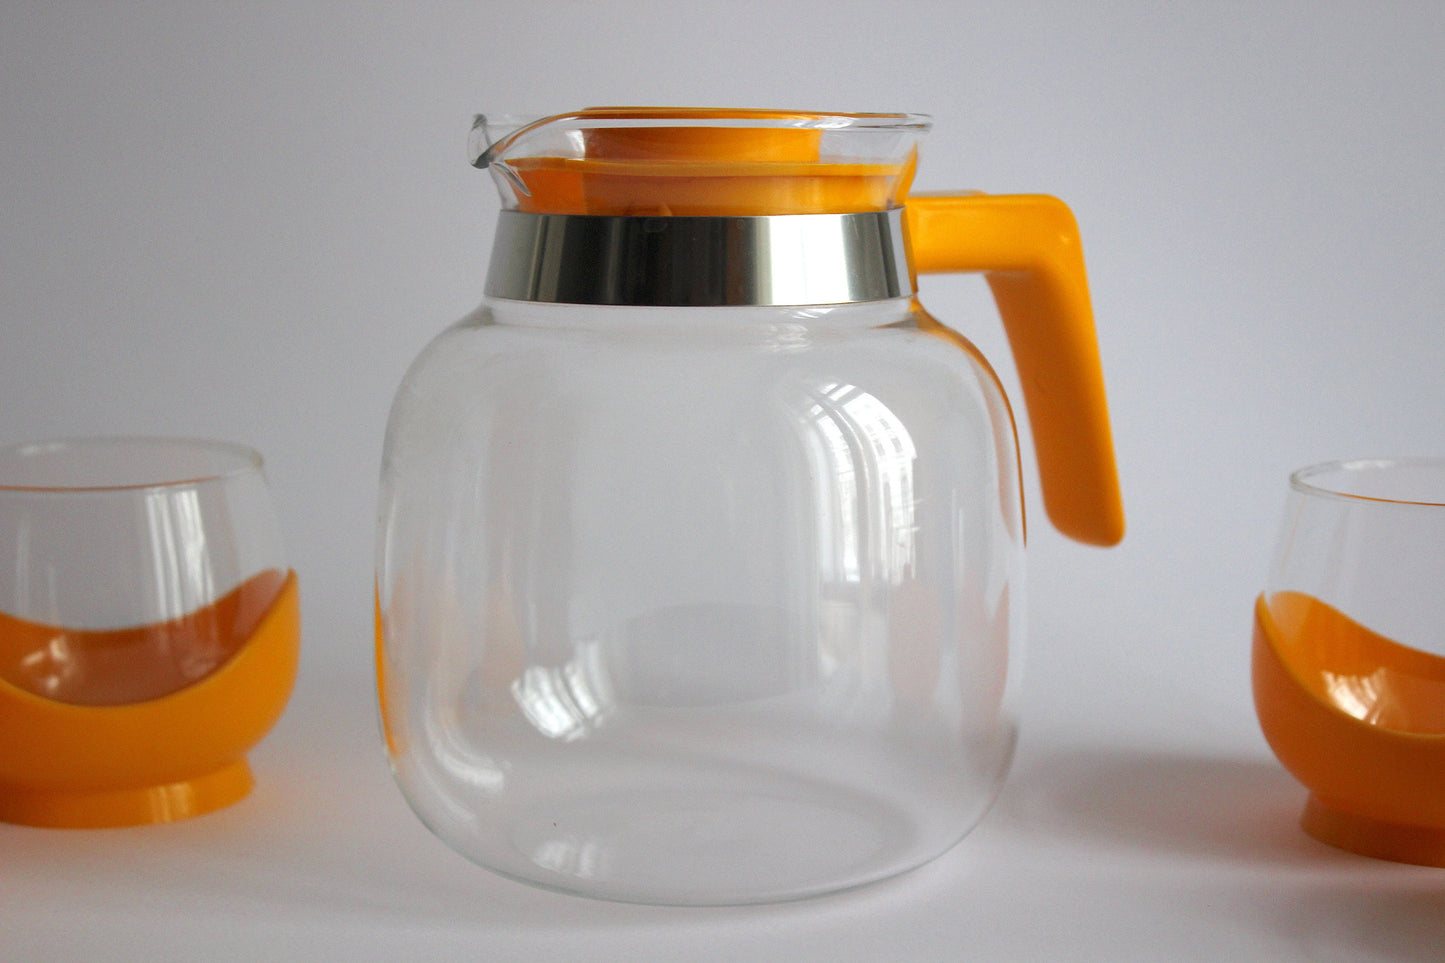 Melitta Germany Set of yellow glass tumblers and pitcher with plastic handles - 60s / 70s